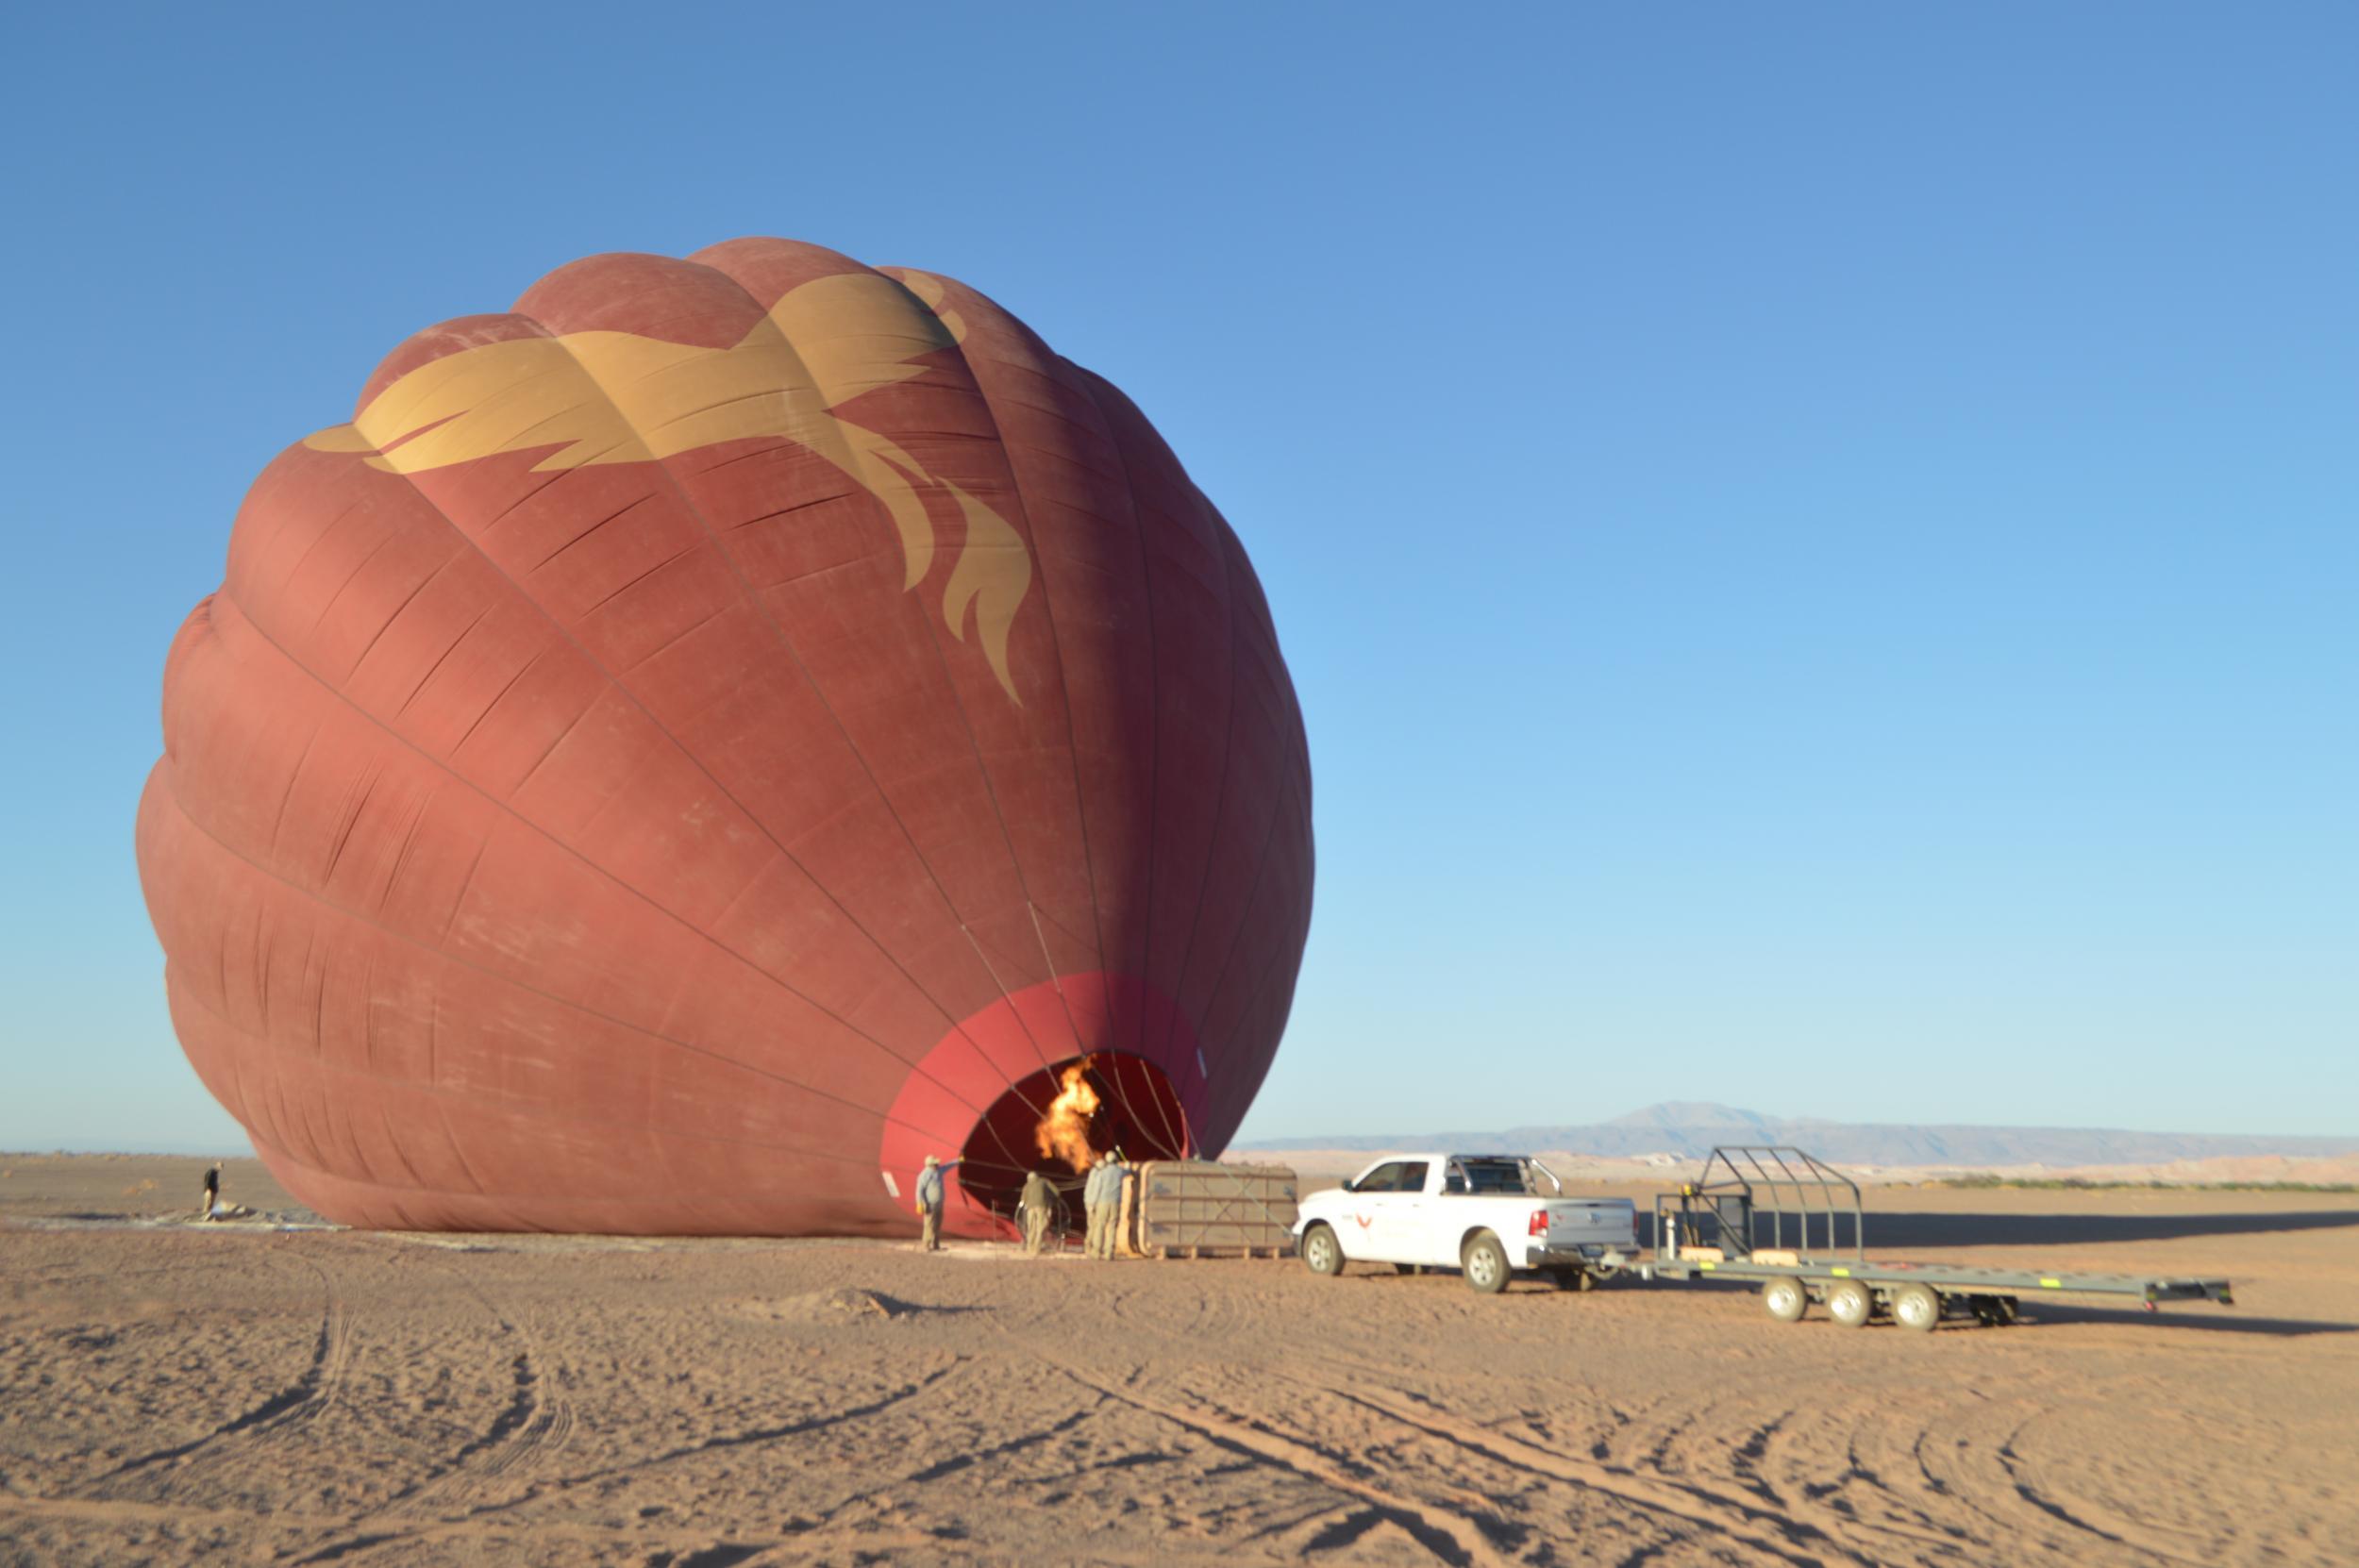 Our writer's air balloon prepares for take-off